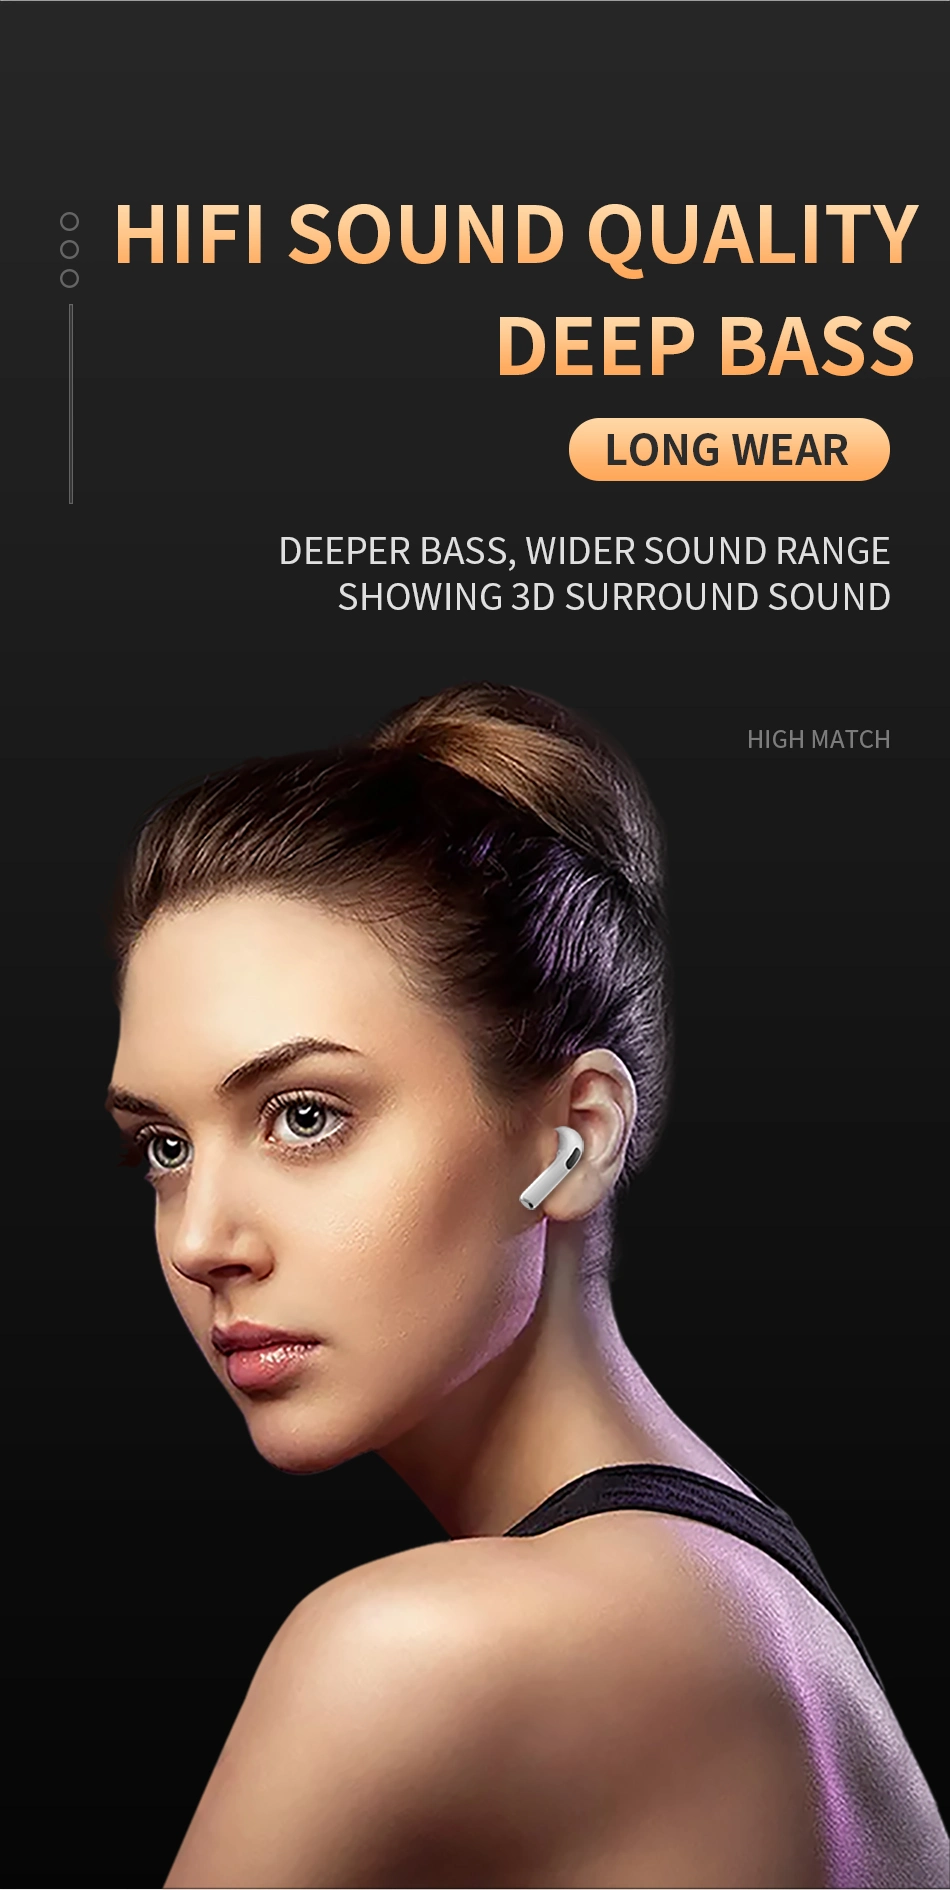 Bluetooth Headset with Microphone Tws PRO6 Earbuds Noise Reduction Running Earpieces for Xiaomi Huawei iPhone